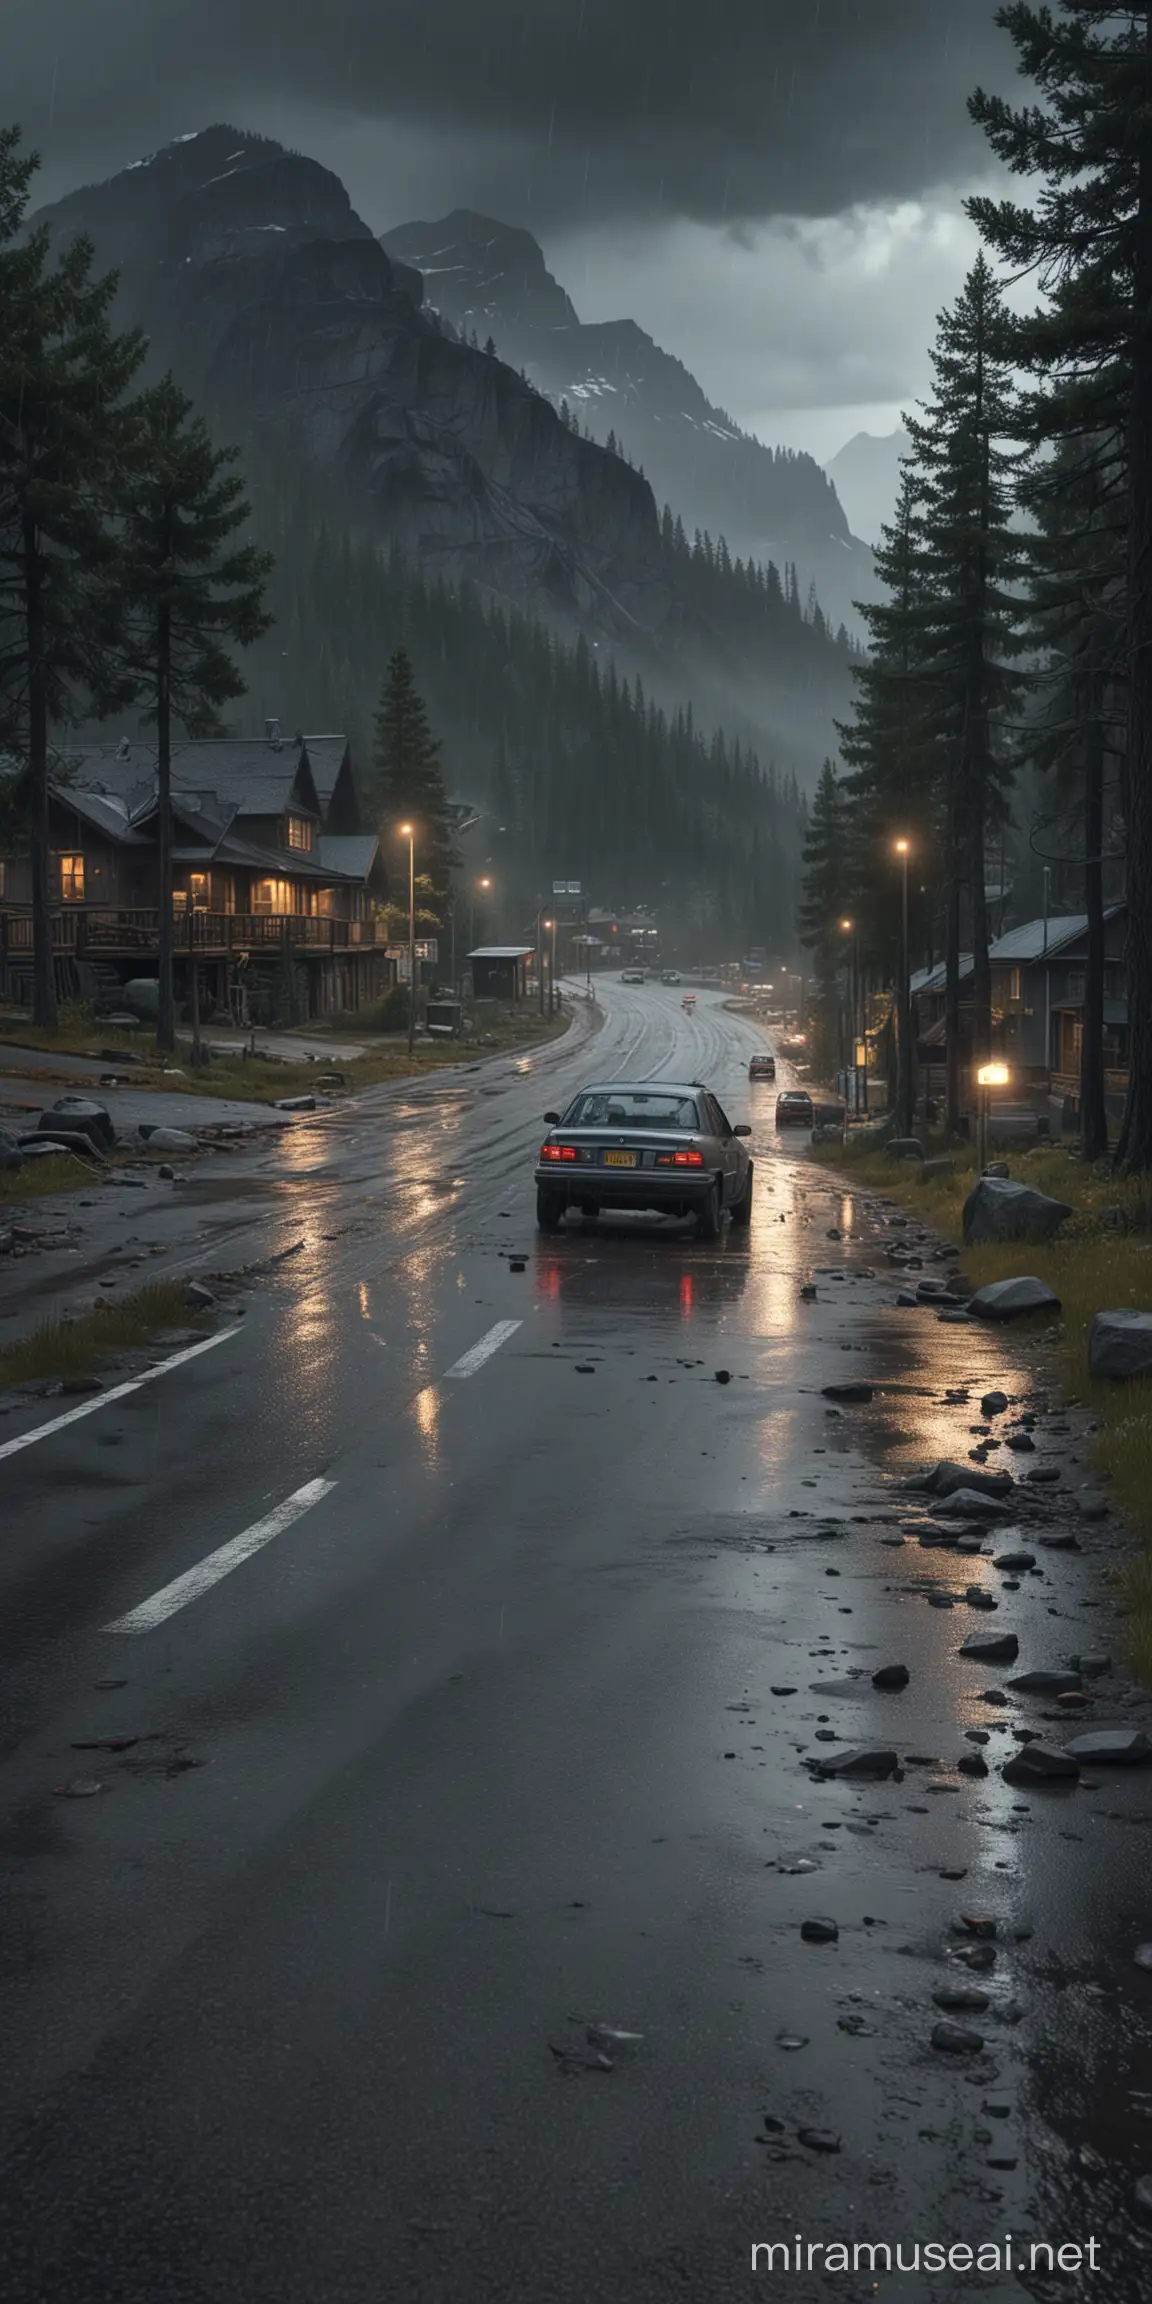 canada little town, like Wayward Town, dark athmosphere, rain, rock and mountains in the background, pine trees, pine forest, in the foreground a road runs to the city, a broken car on the road, the car's lights are on, photorealistic image, with many parts